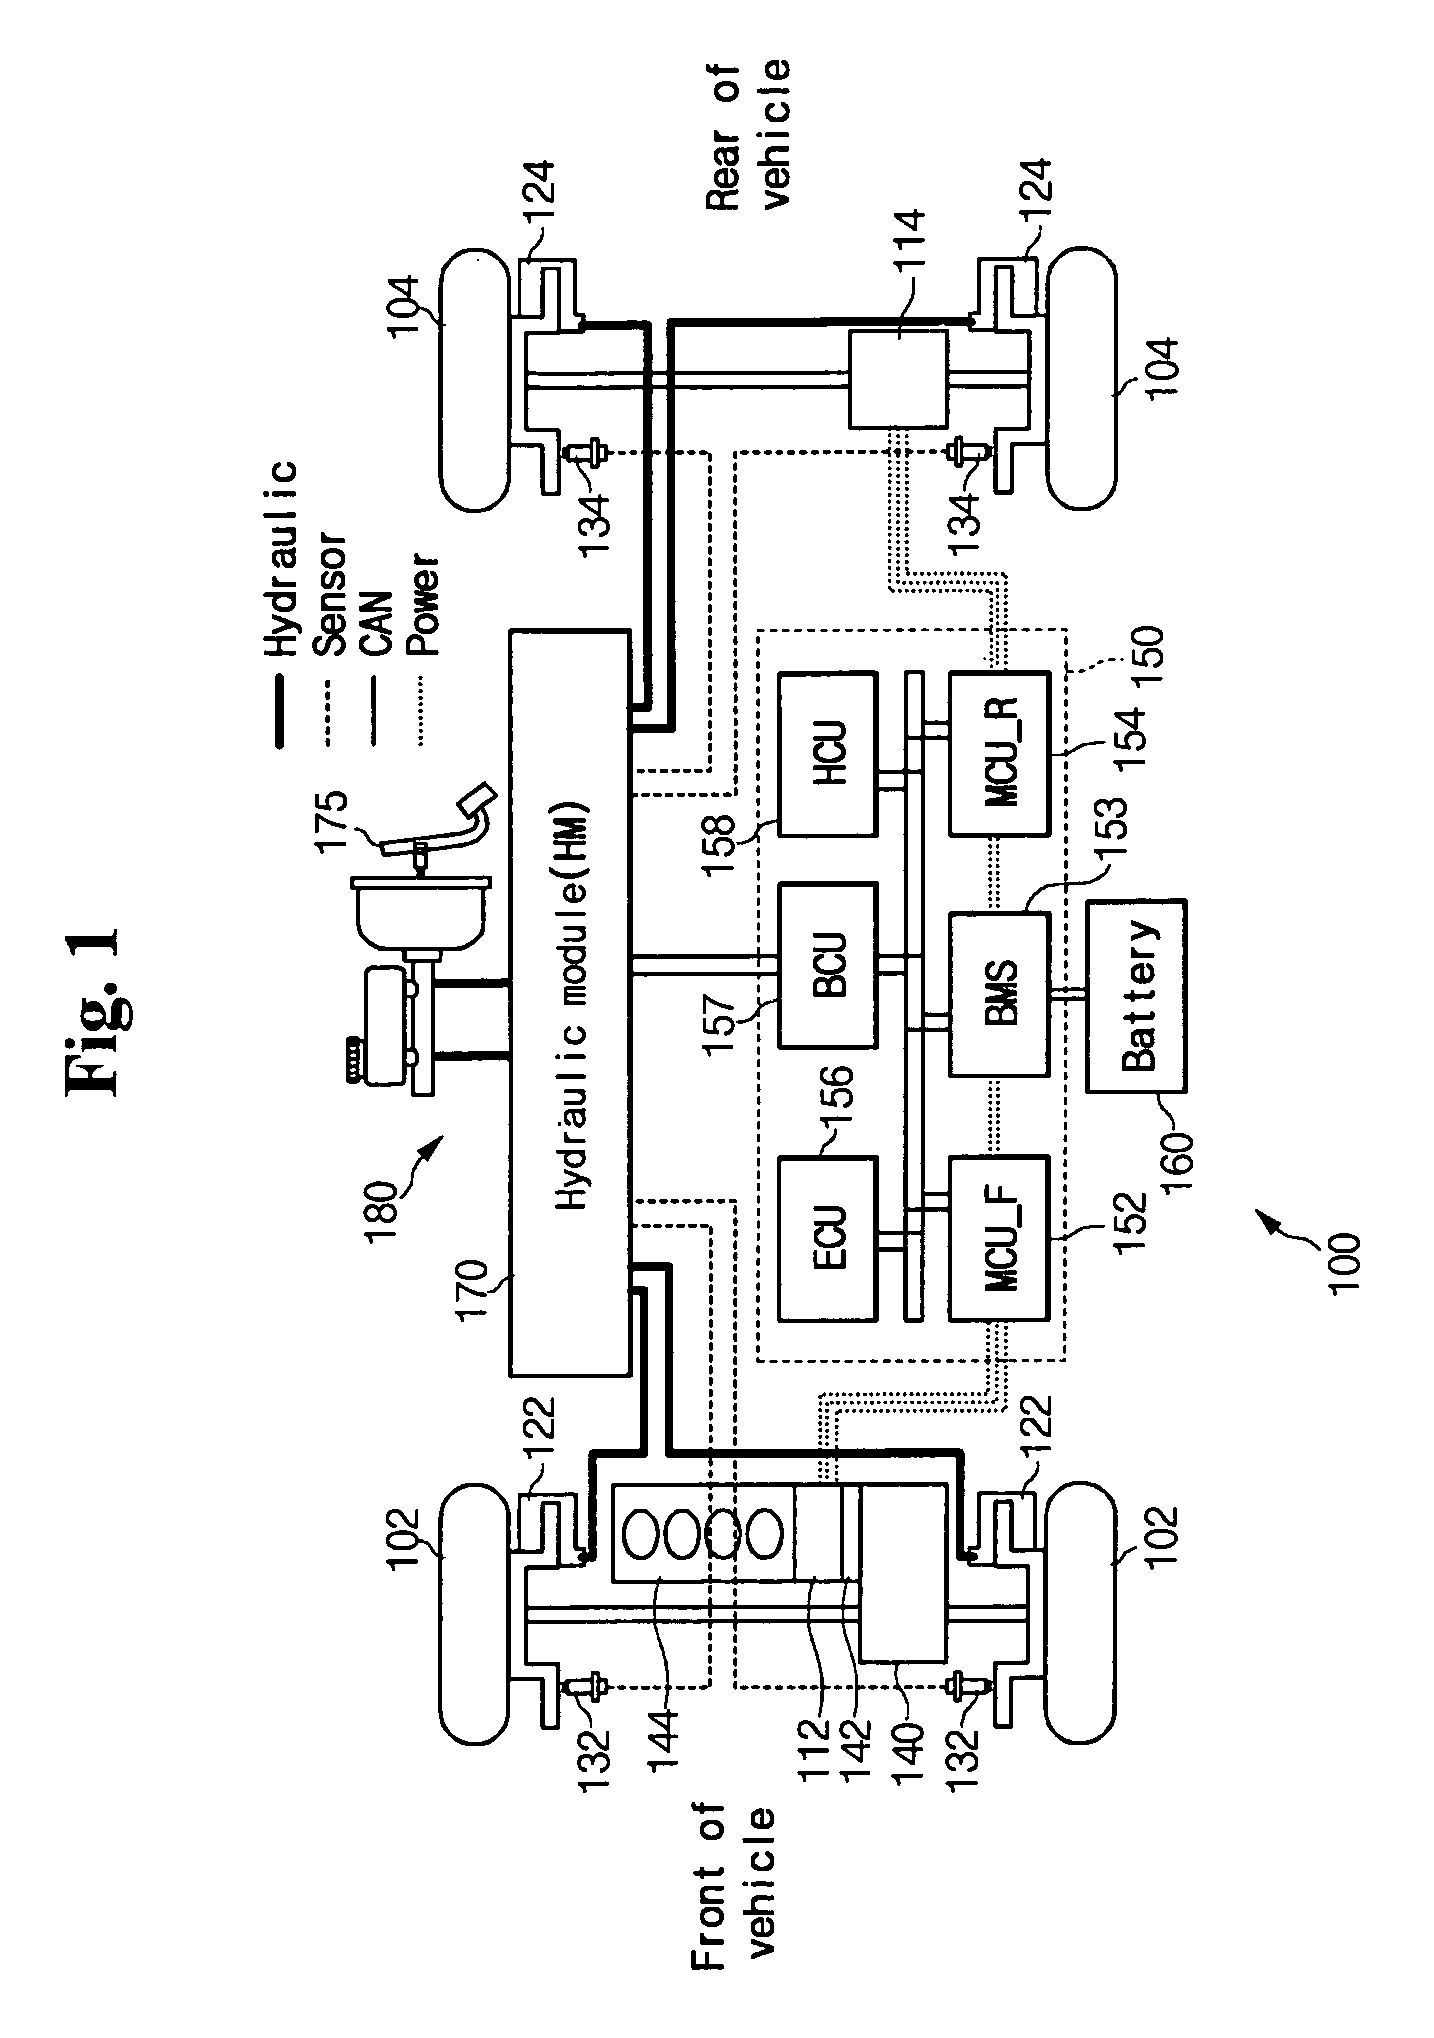 Method and system for controlling regenerative braking of a four wheel drive electric vehicle